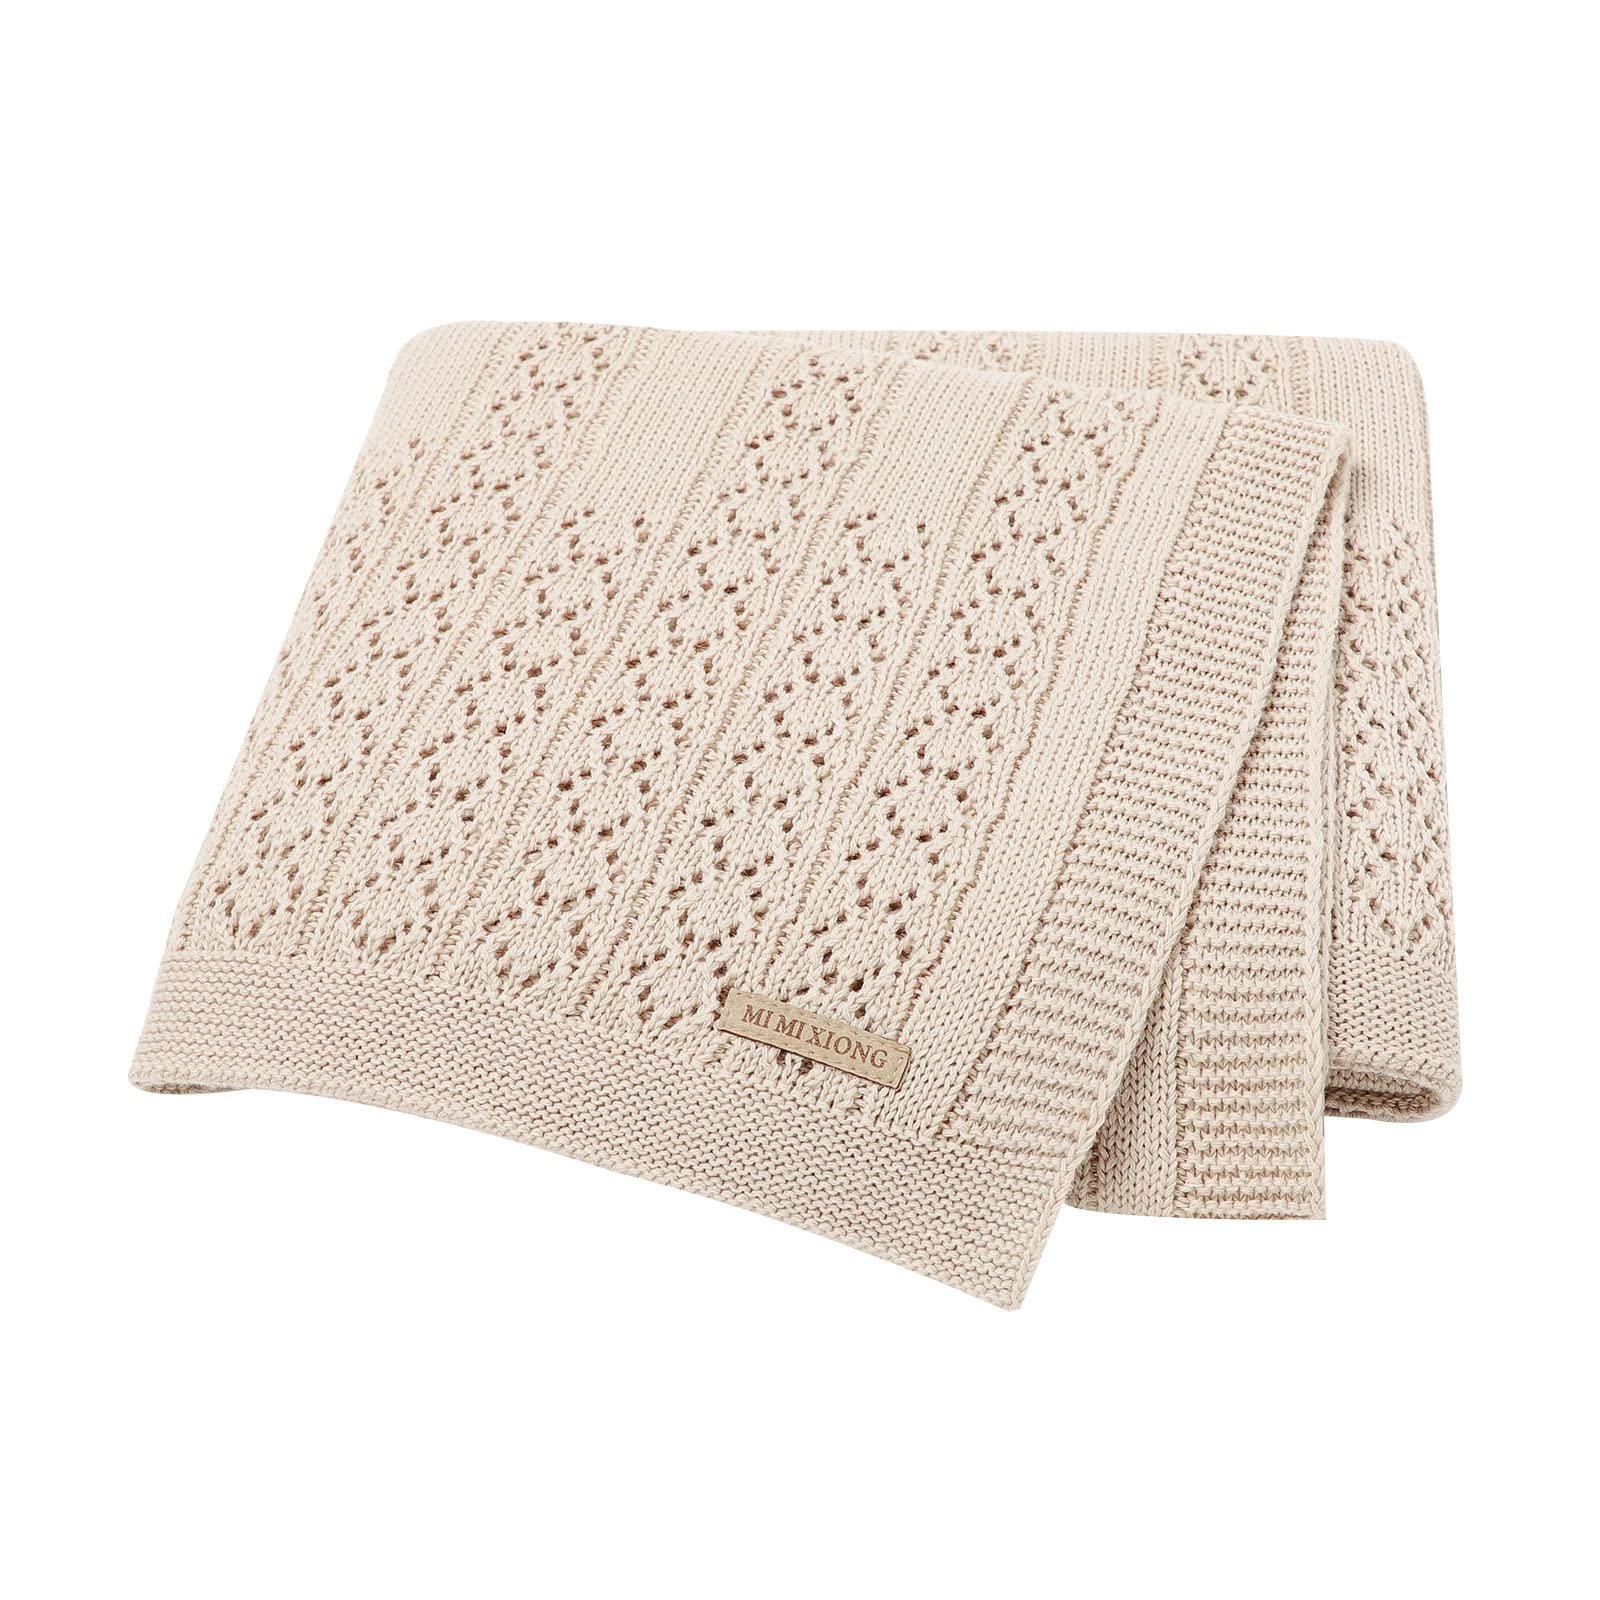 DovFanny Cotton Cellular Baby Blanket Knitted Soft Blanket for Newbron Baby Boy and Girls 100 x 80cm Beige